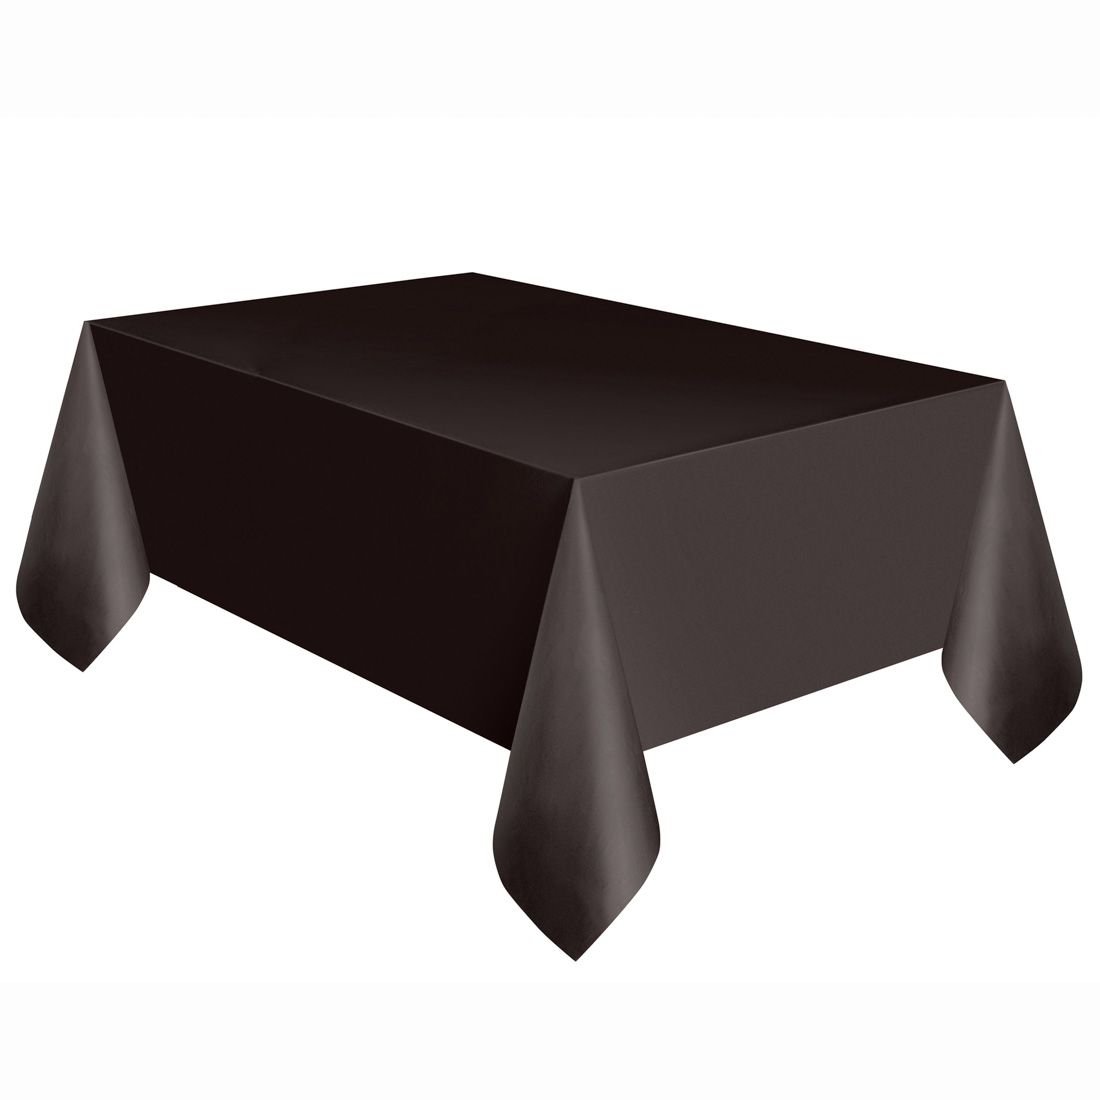 321 Party! Plastic Tablecover, Black